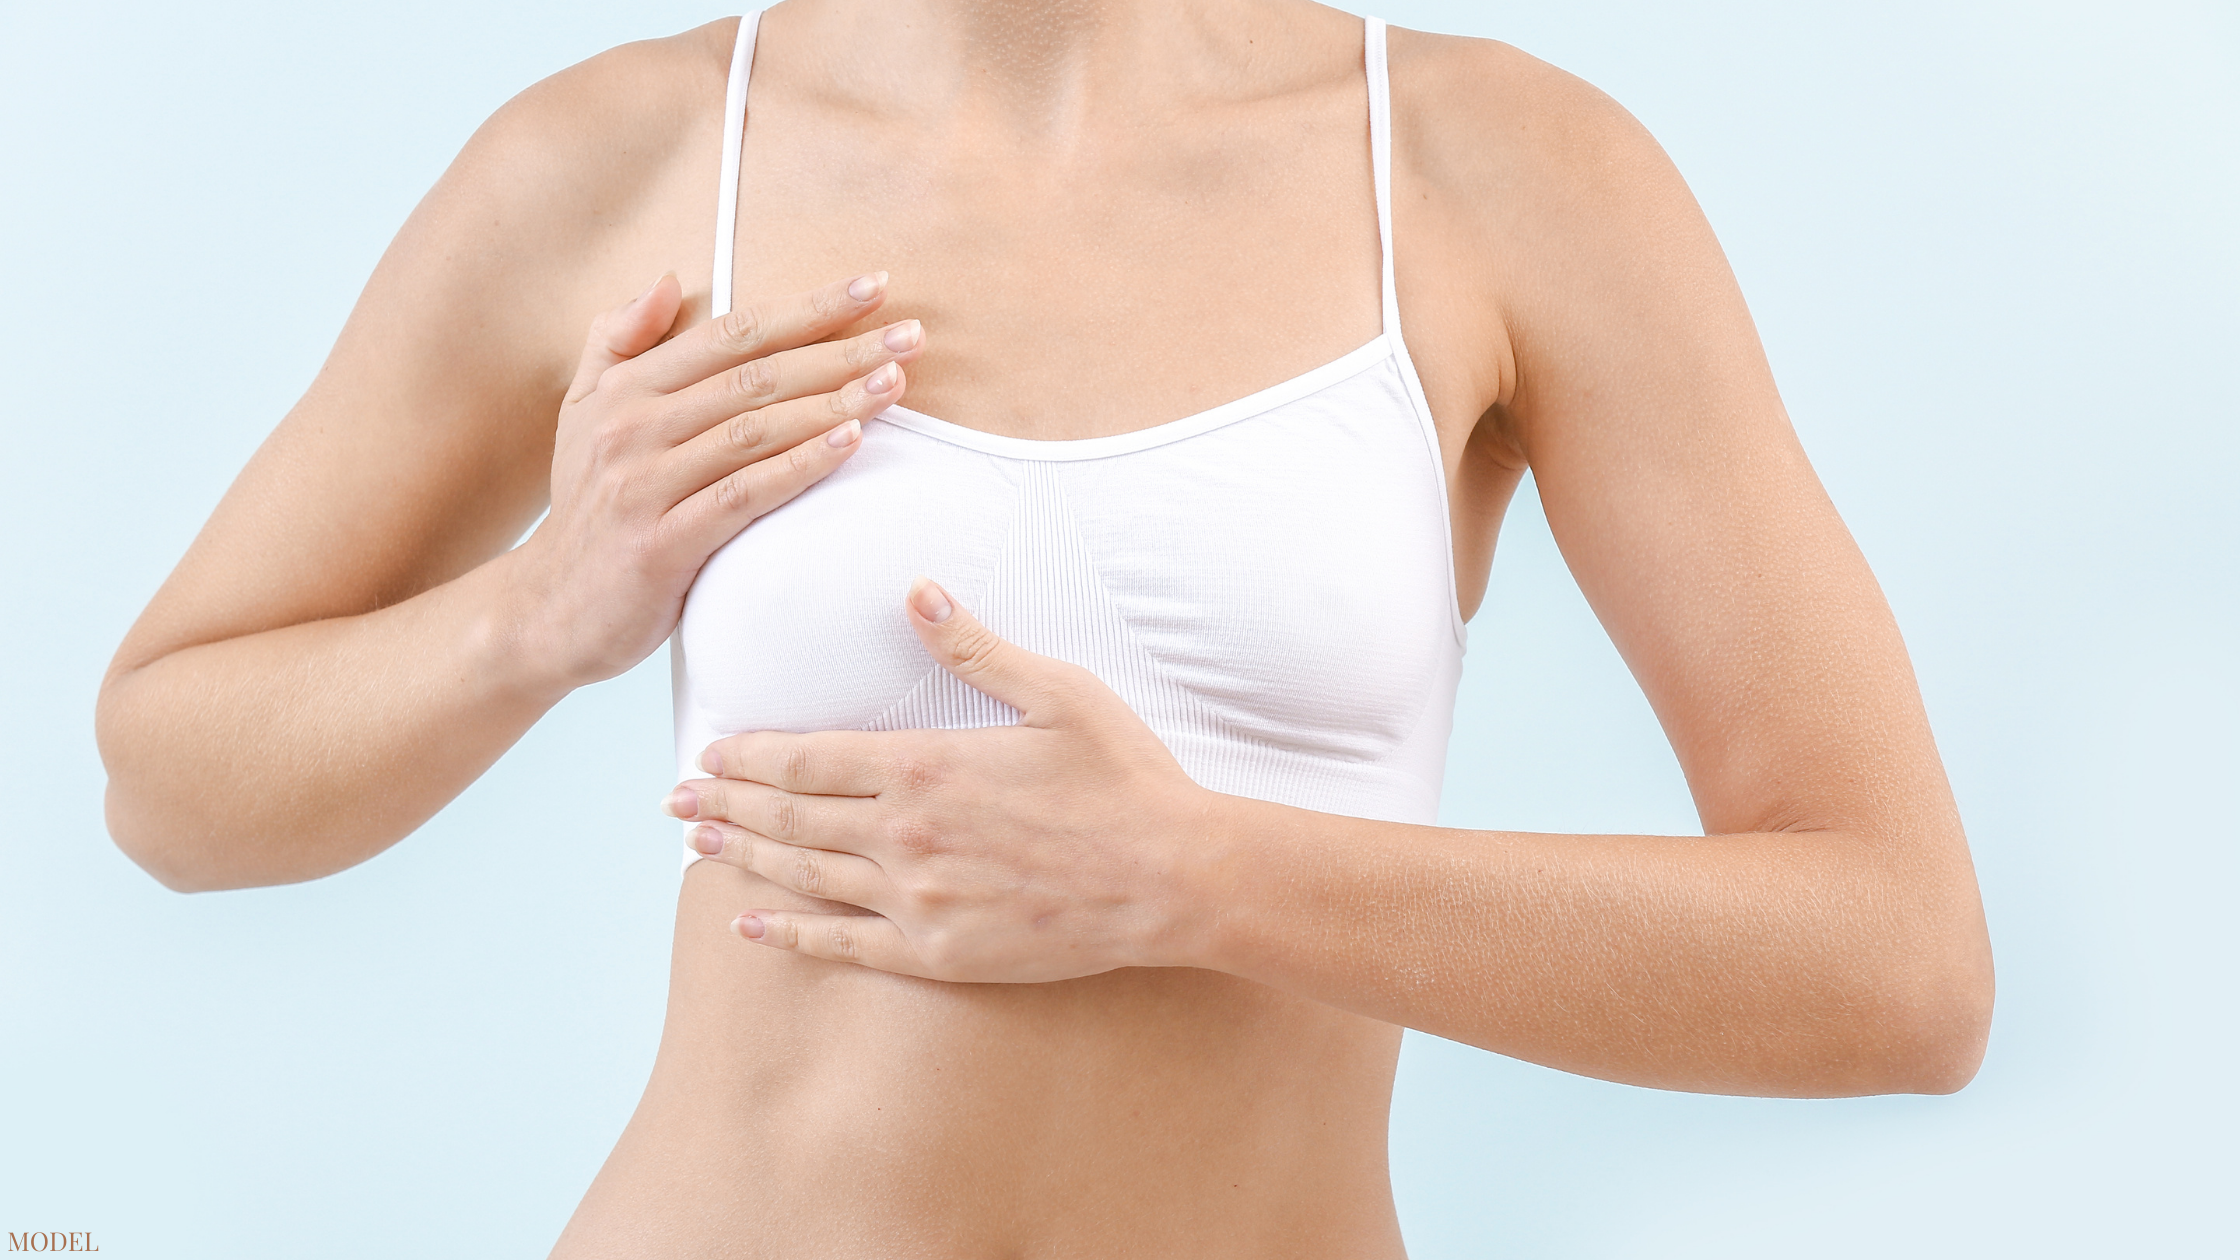 What is tubular breast syndrome? The condition no one is talking